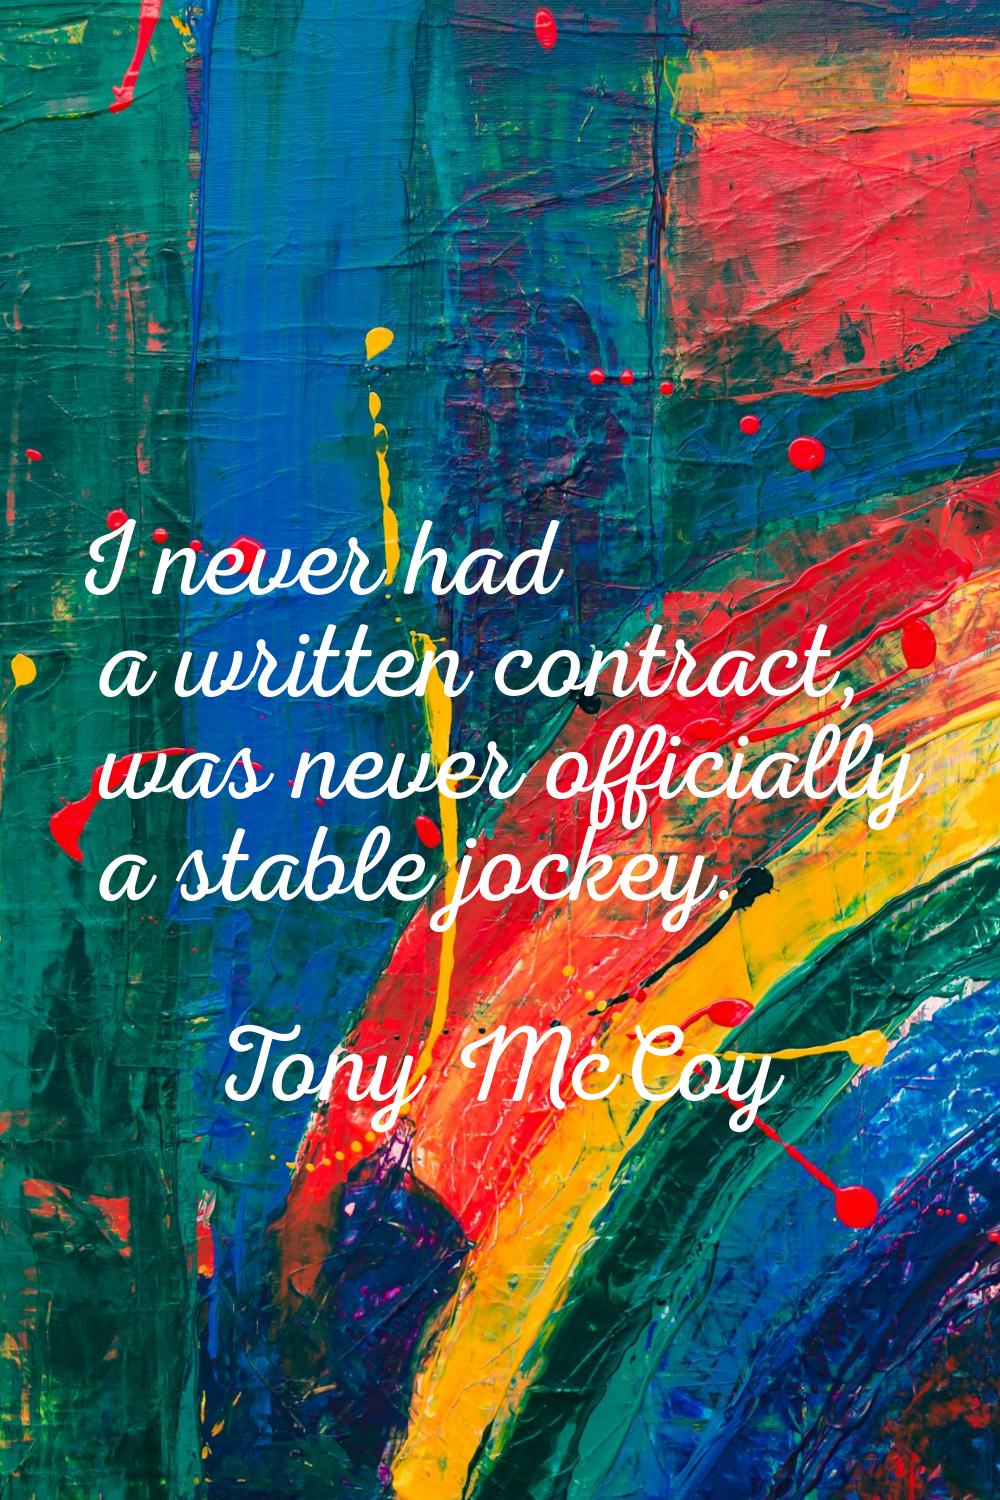 I never had a written contract, was never officially a stable jockey.